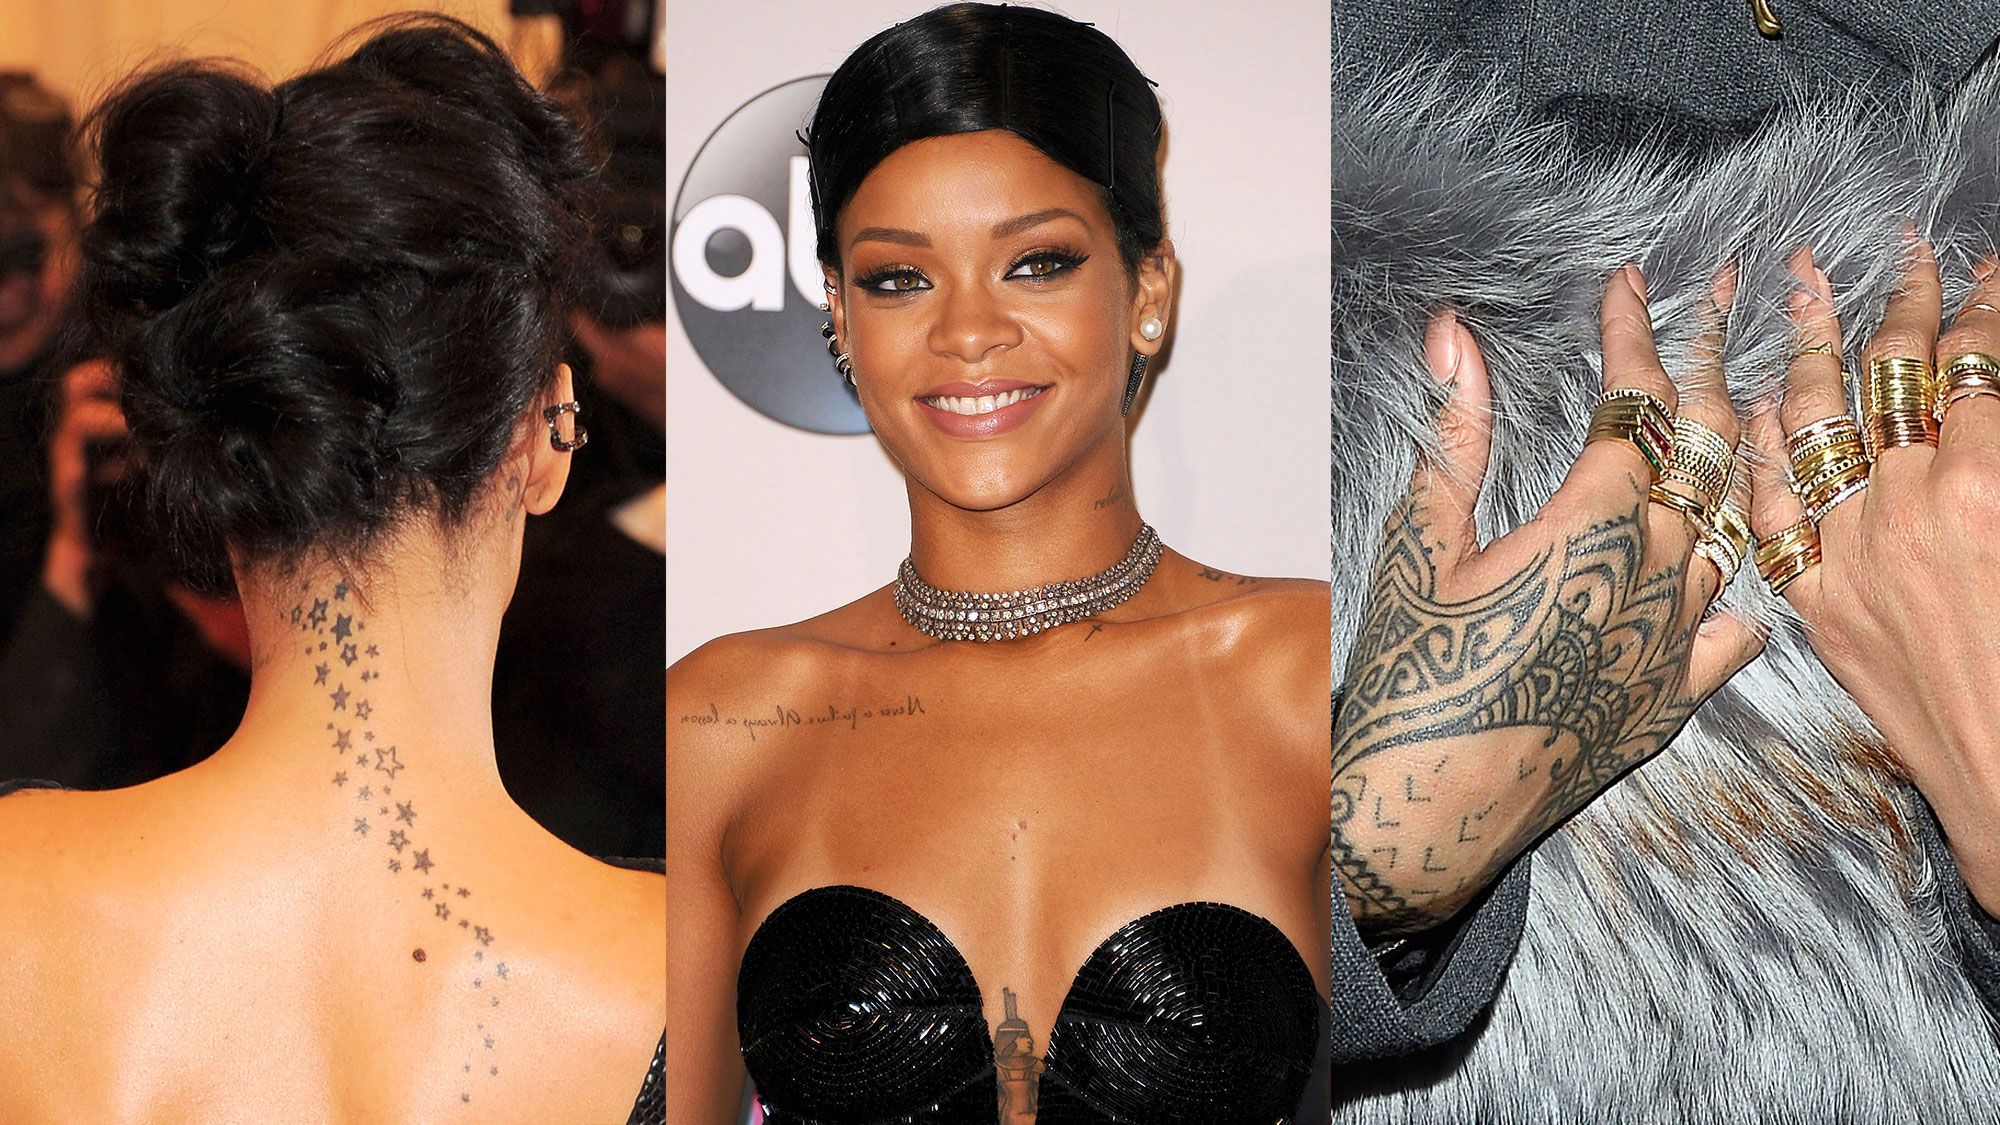 What is the most famous tattoo? - Quora